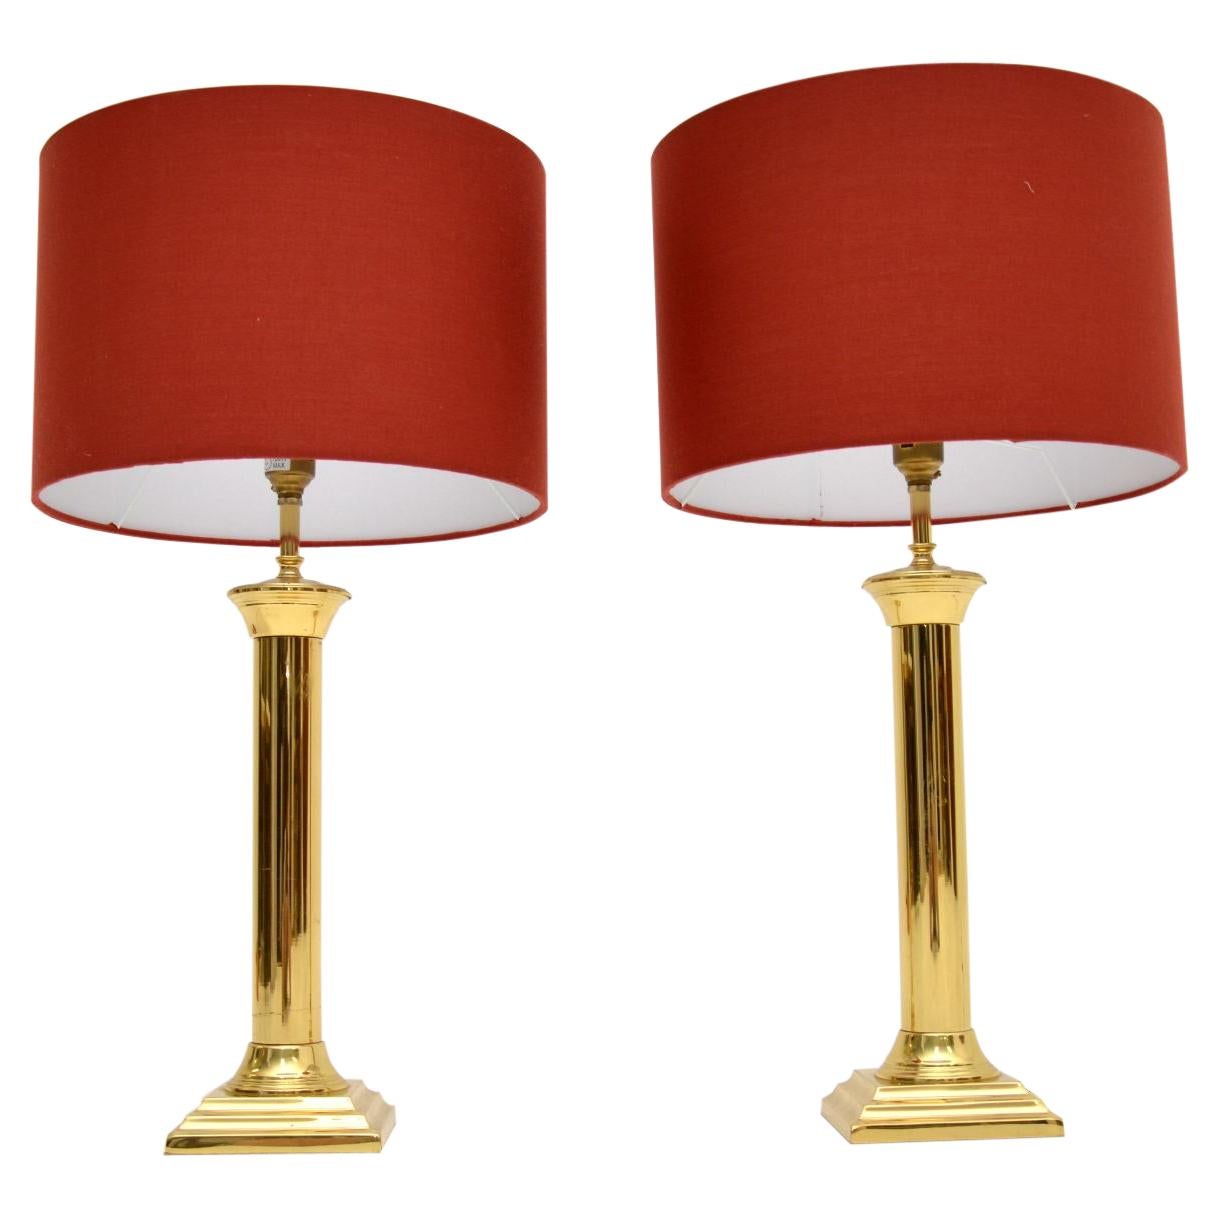 Pair of Vintage Solid Brass Table Lamps